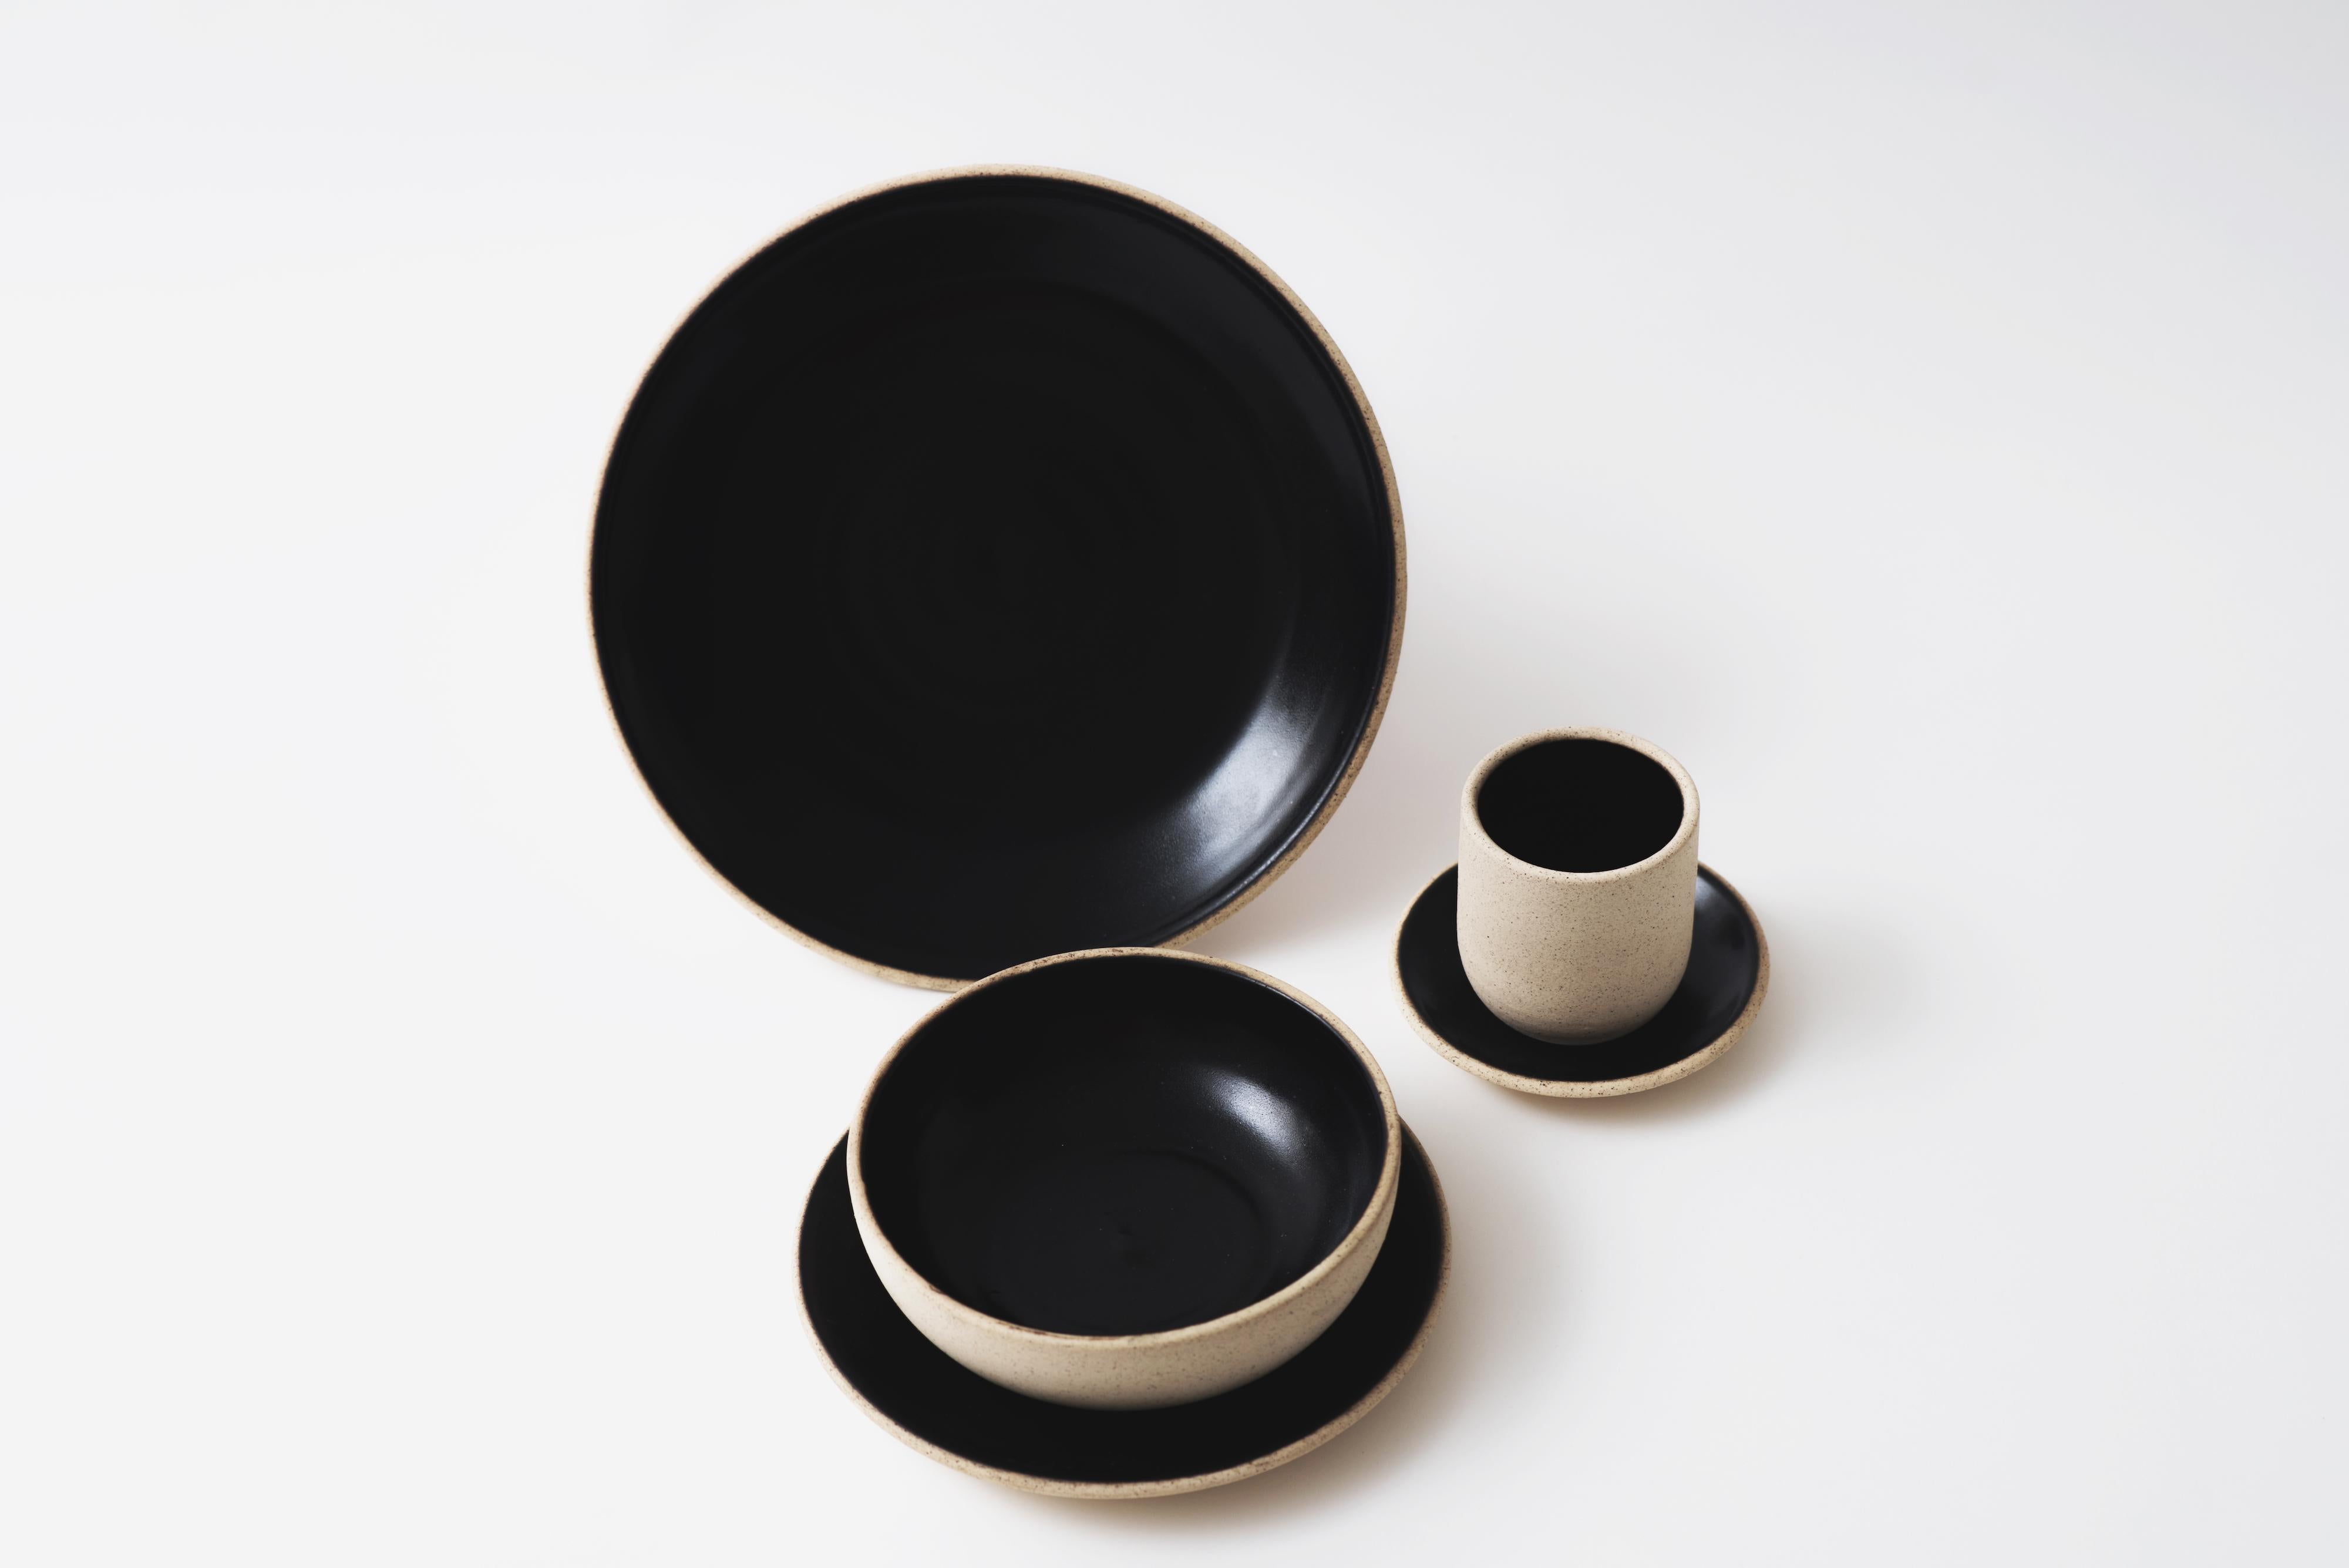 Hand-Crafted Handmade Ceramic Stoneware Saucer in Black Obsidian and Natural, in Stock